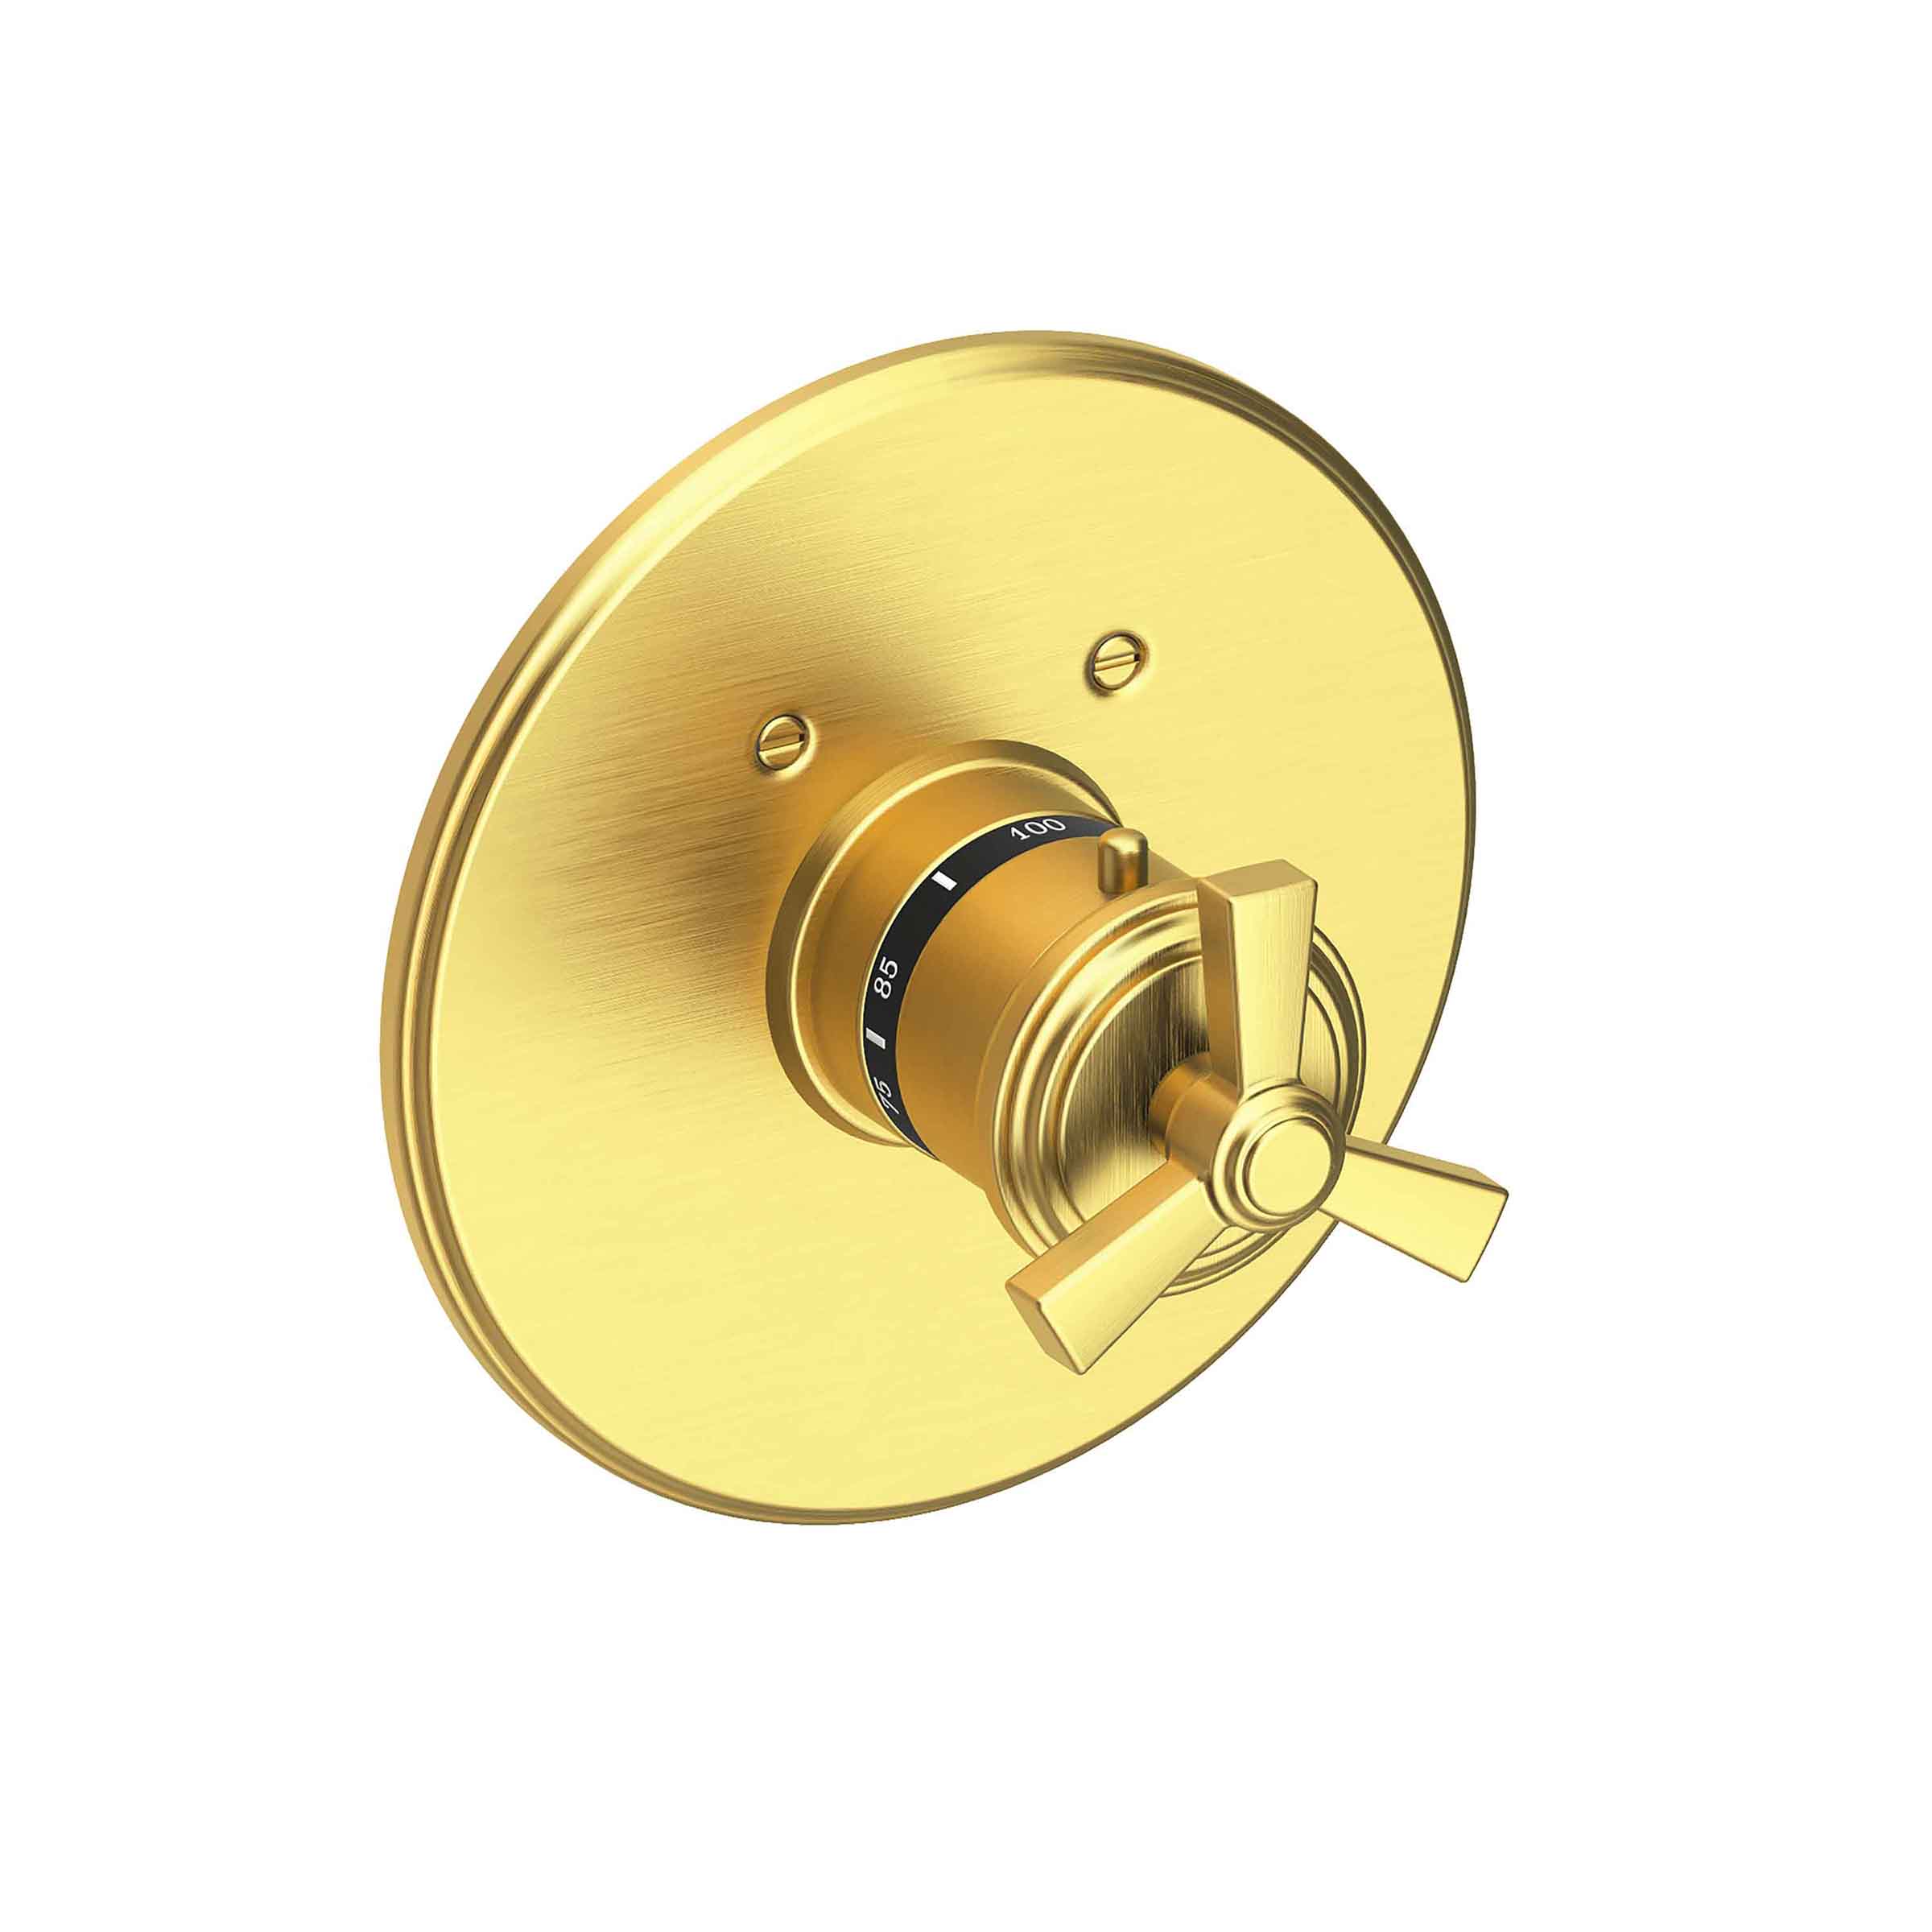 Newport Brass Miro 3/4" Round Thermostatic Trim Plate with Handle